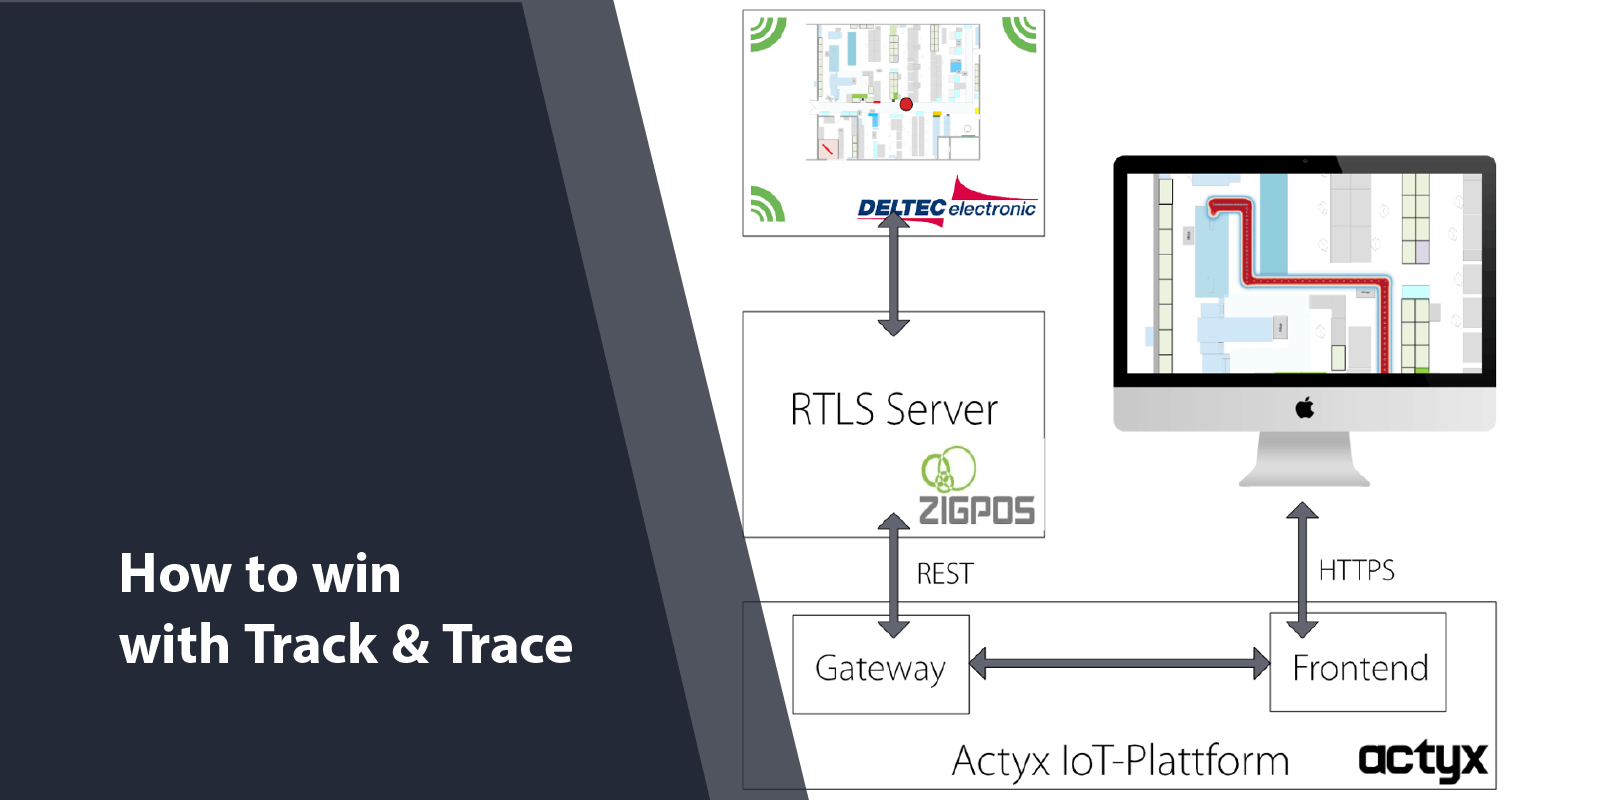 Slidedeck - How to win with Track & Trace